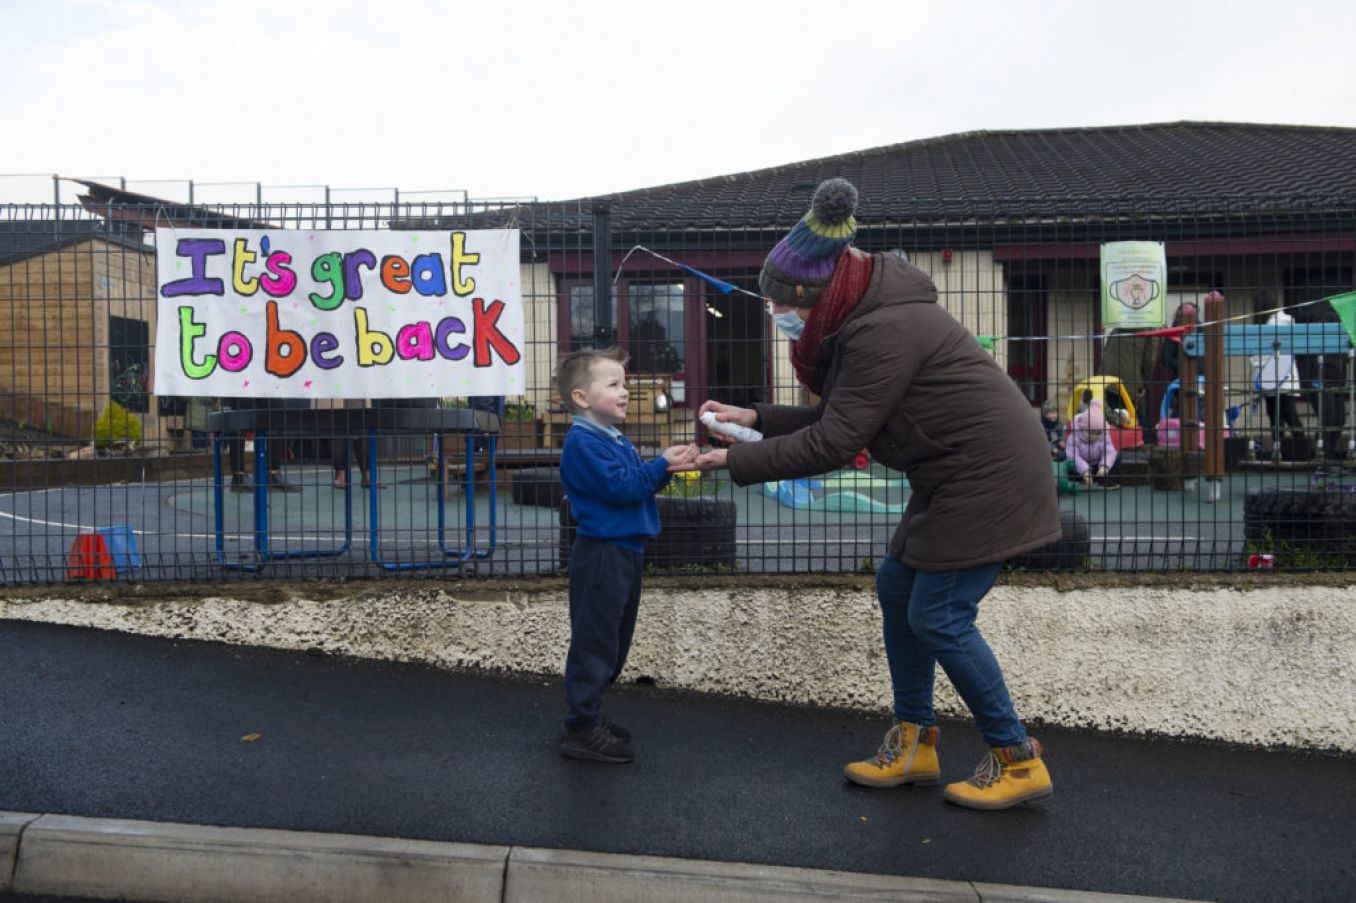 The Head Teacher Of Hazelwood Integrated Nursery School In Newtownabbey, Co Antrim, Sanitises A Child's Hands. Primary Schools Across The Island Returned In March After The Covid Lockdown. Photo: Charles Mcquillan/Getty